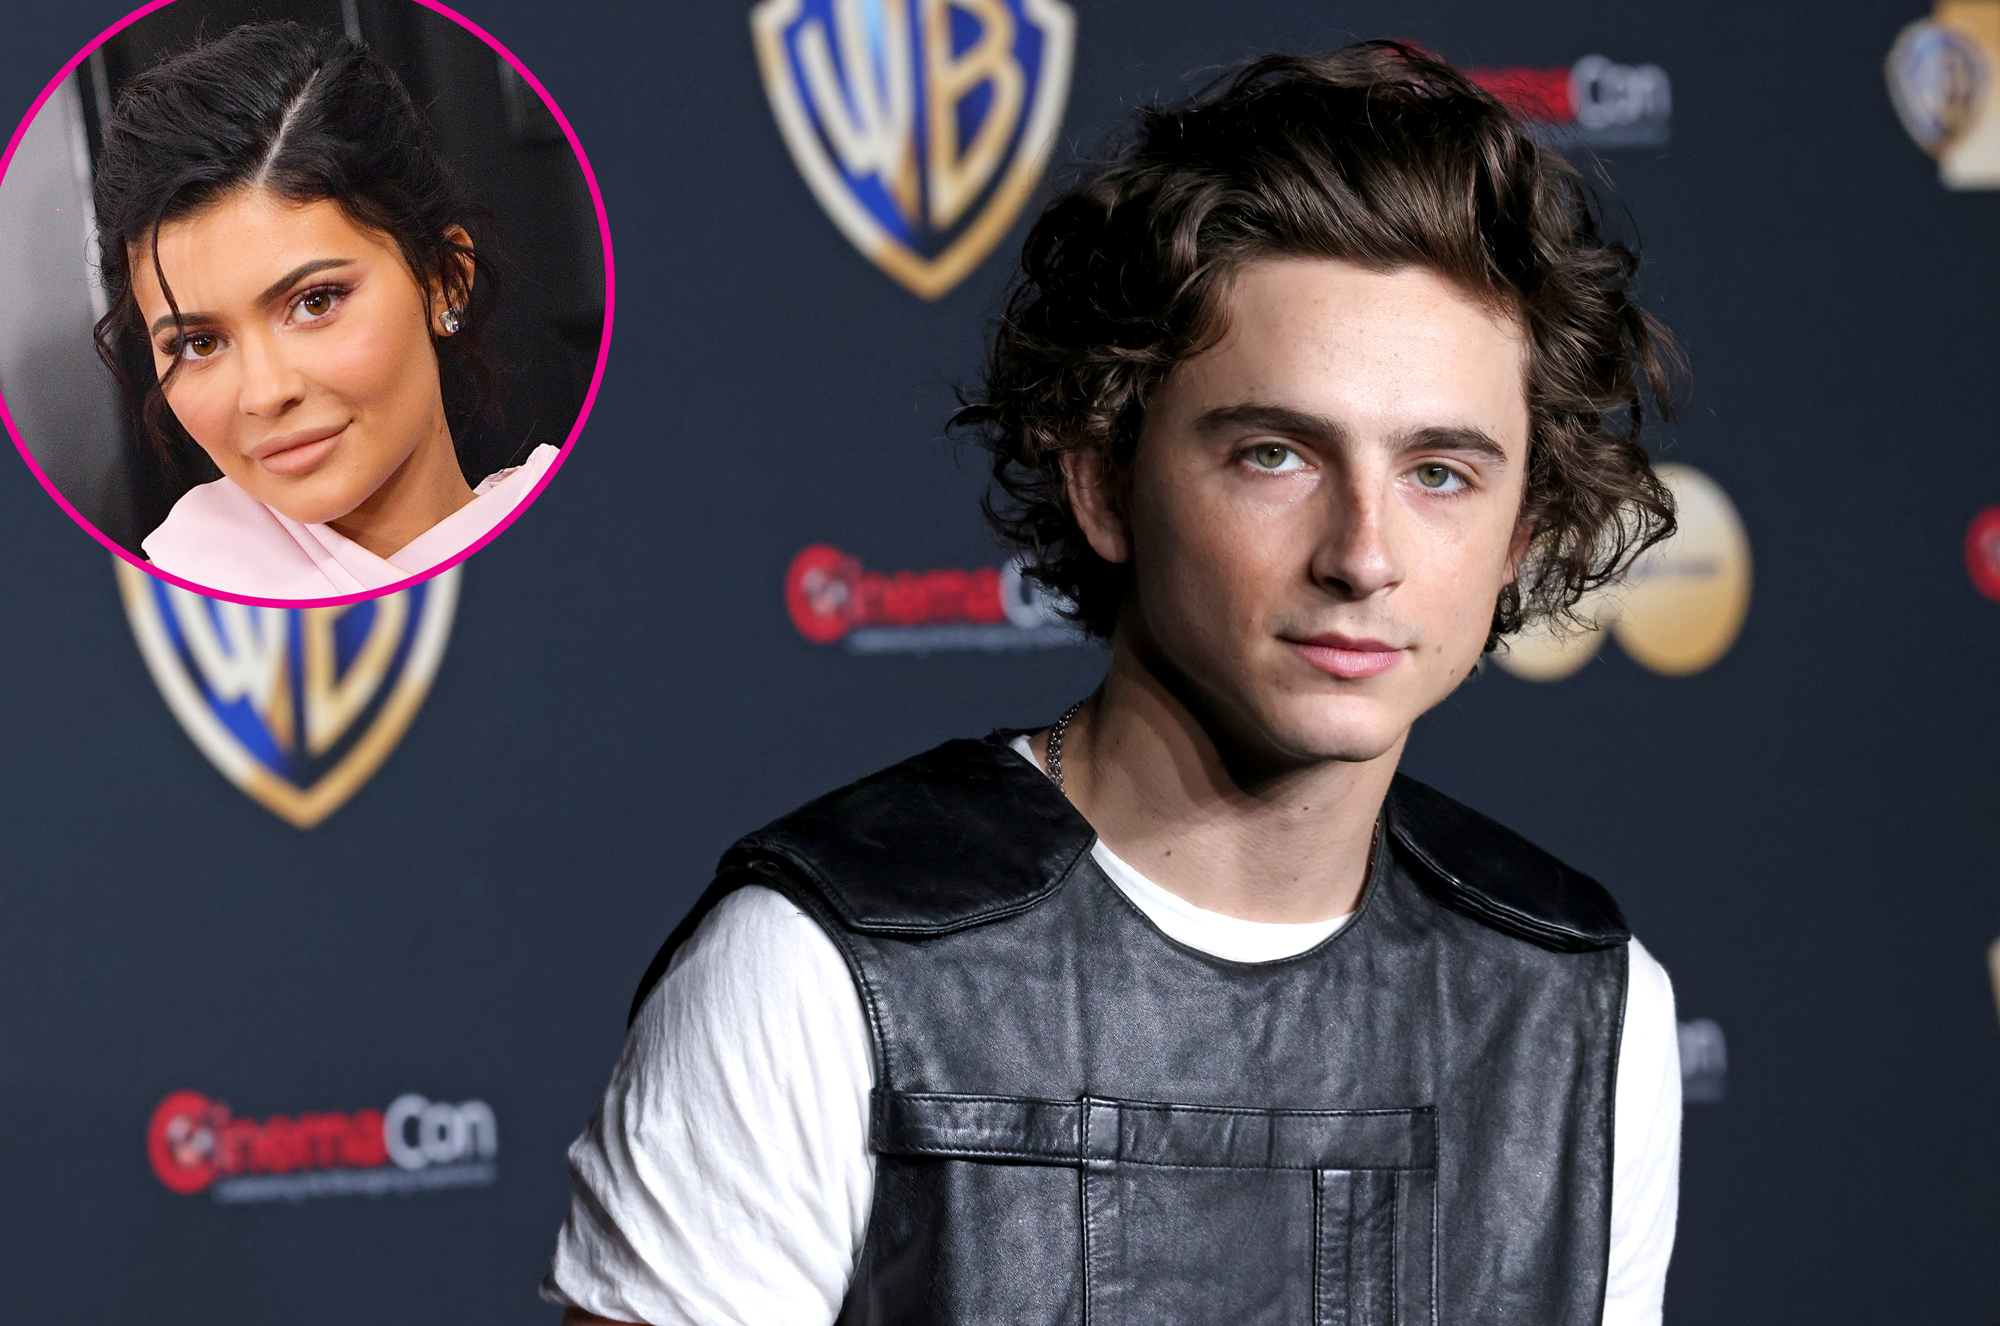 Timothee Chalamet Wants Privacy After Debuting Kylie Jenner Romance